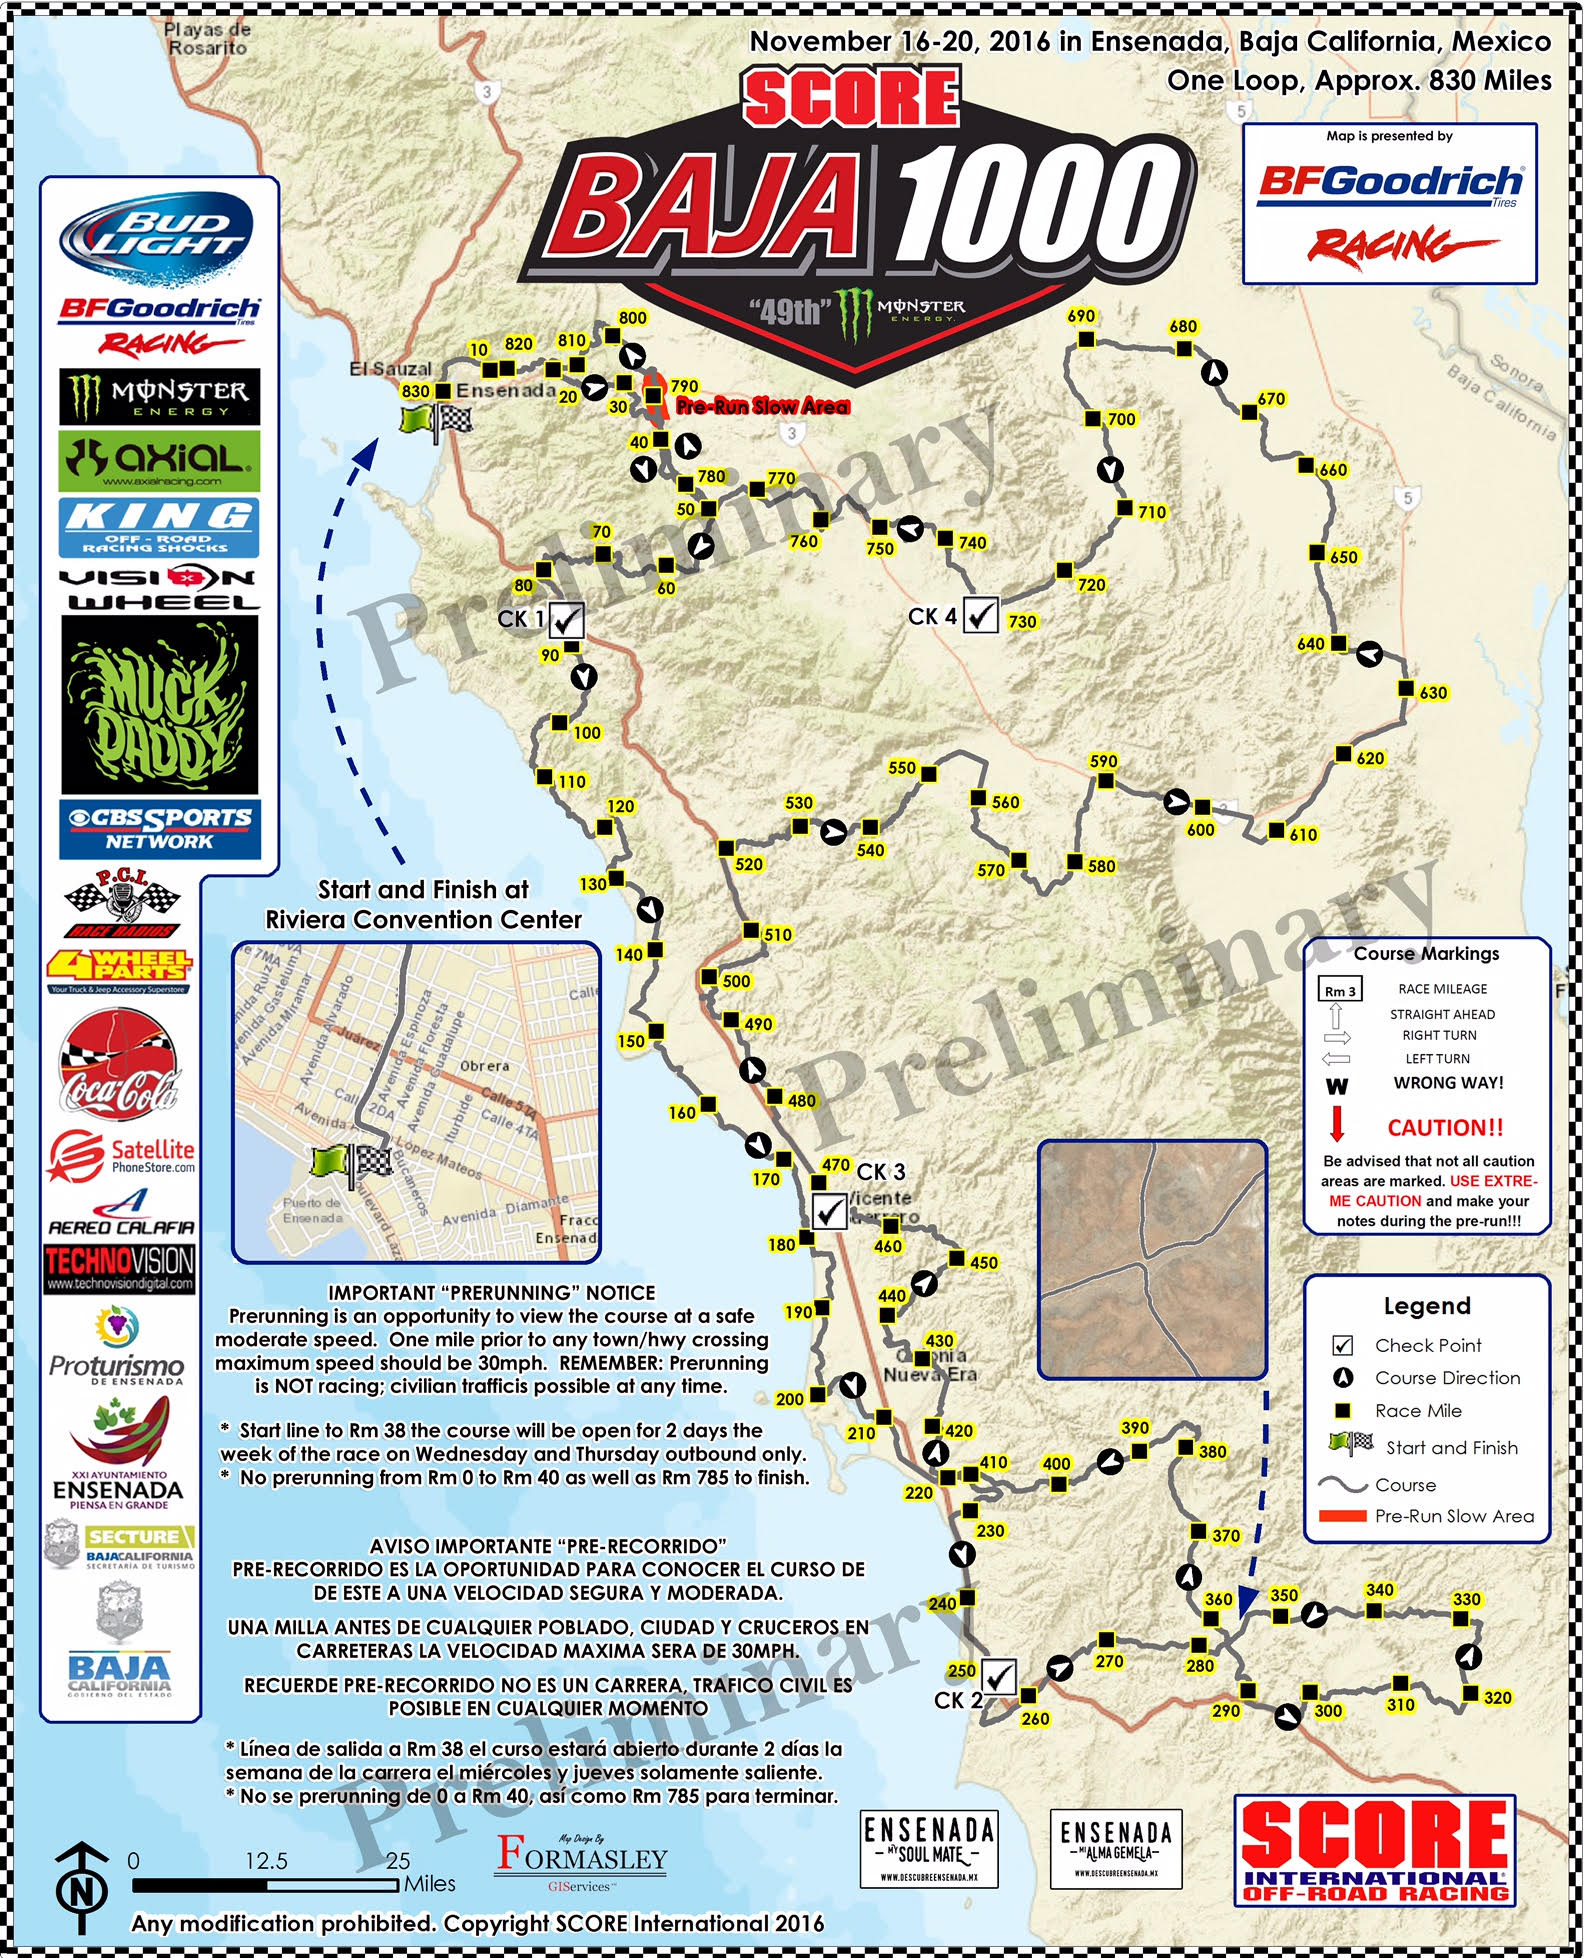 Course map unveiled for 49th annual SCORE Baja 1000 at colorful SCORE Baja 1000 exhibit at Off